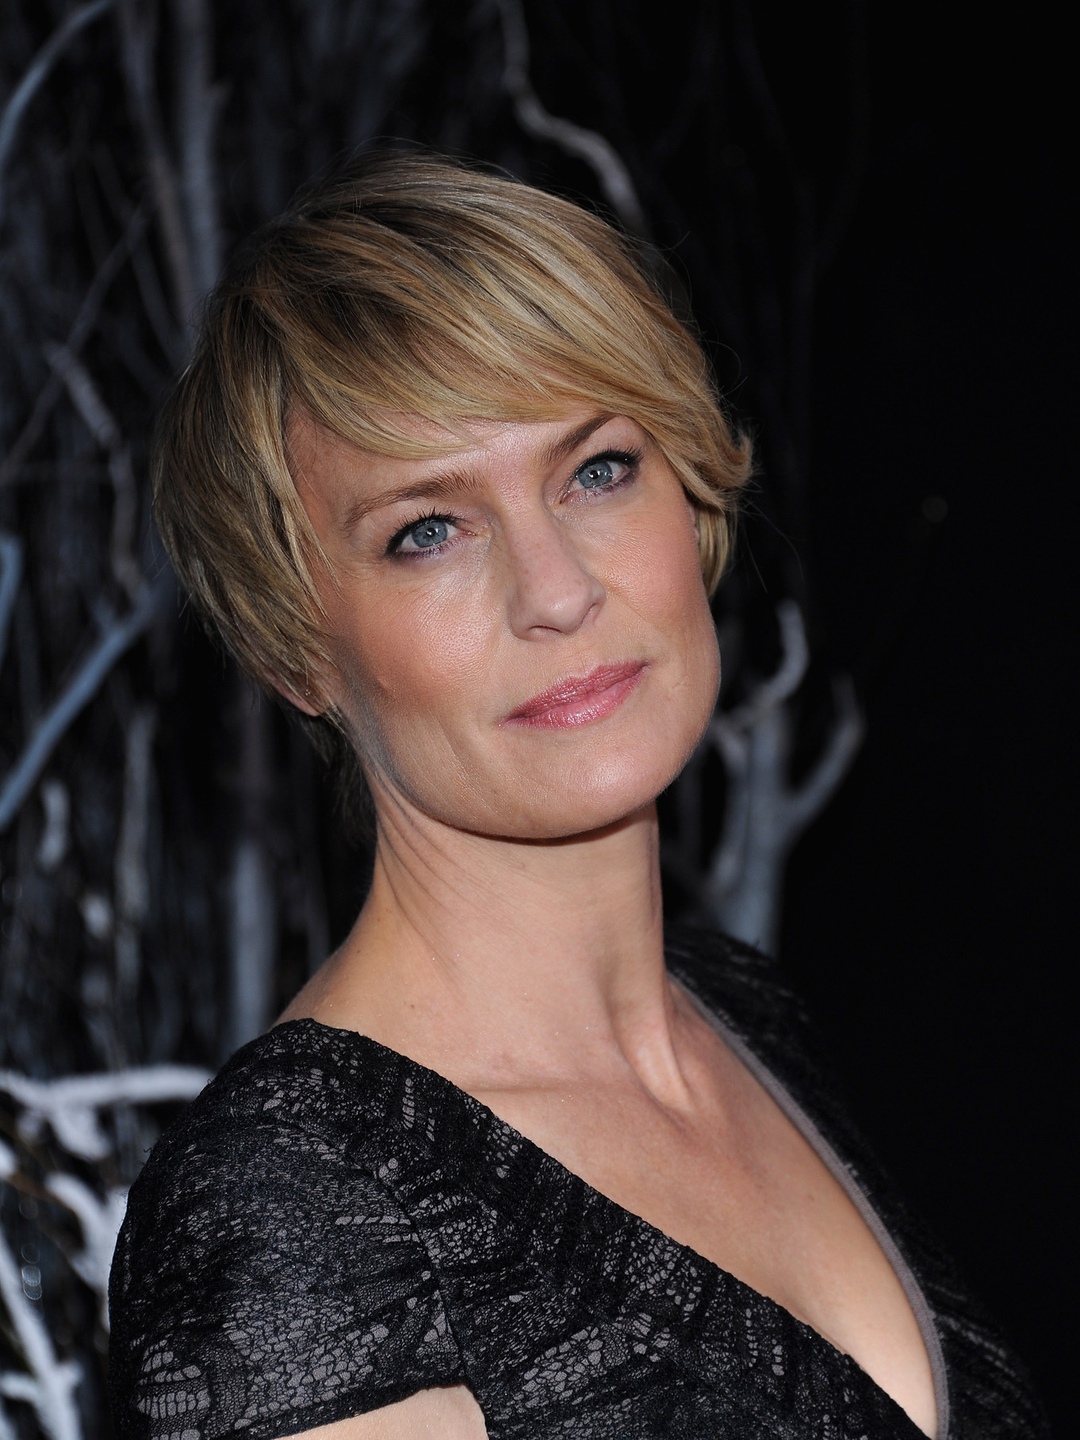 Robin Wright who is her mother